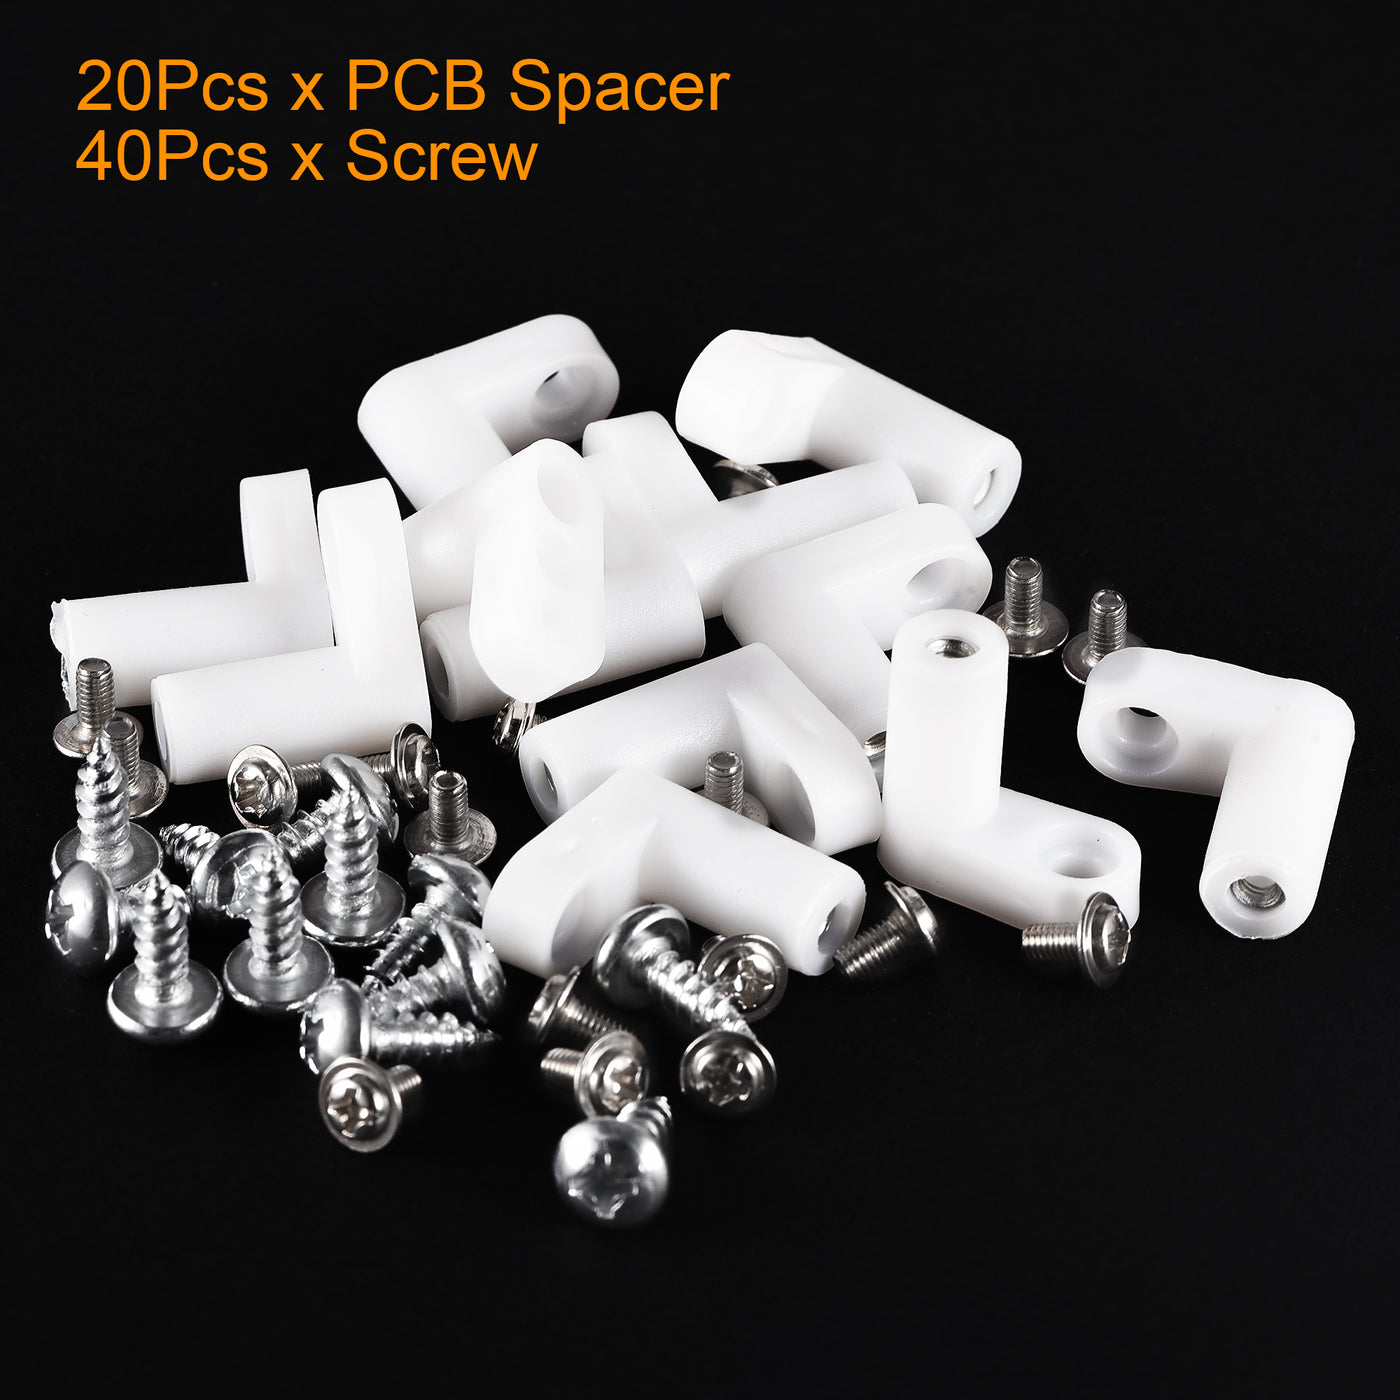 uxcell Uxcell 20Pcs Circuit Board PCB Spacers L Shape Insulated Plastic Fixed Mounting Feet 0.8'' Supporting Height with Screws